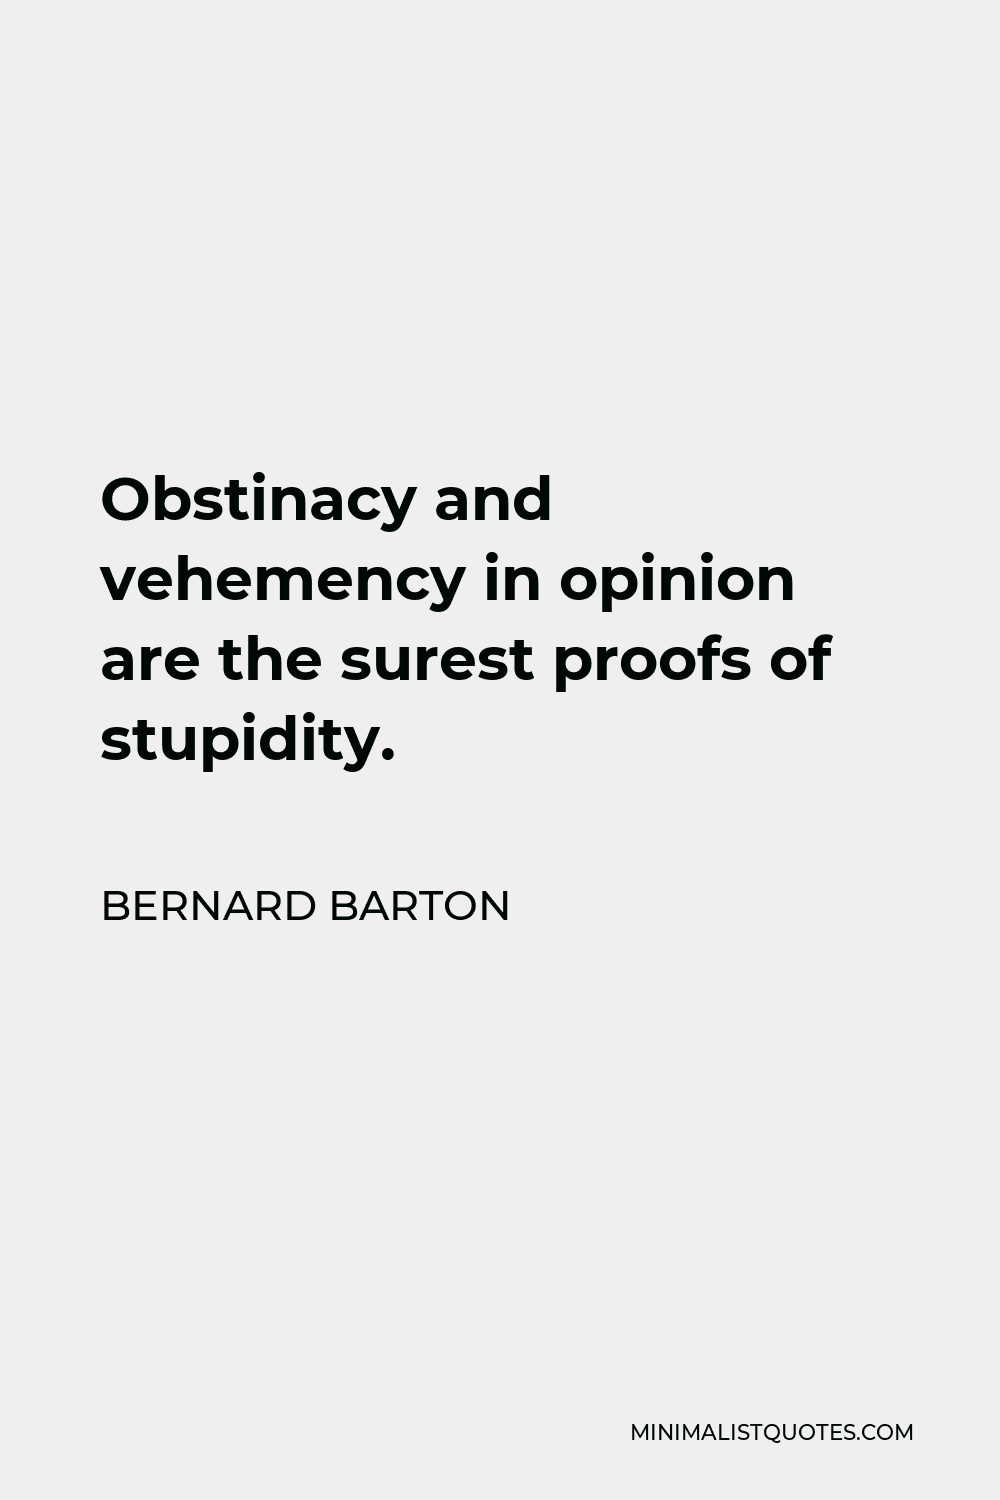 Bernard Barton Quote - Obstinacy and vehemency in opinion are the surest proofs of stupidity.